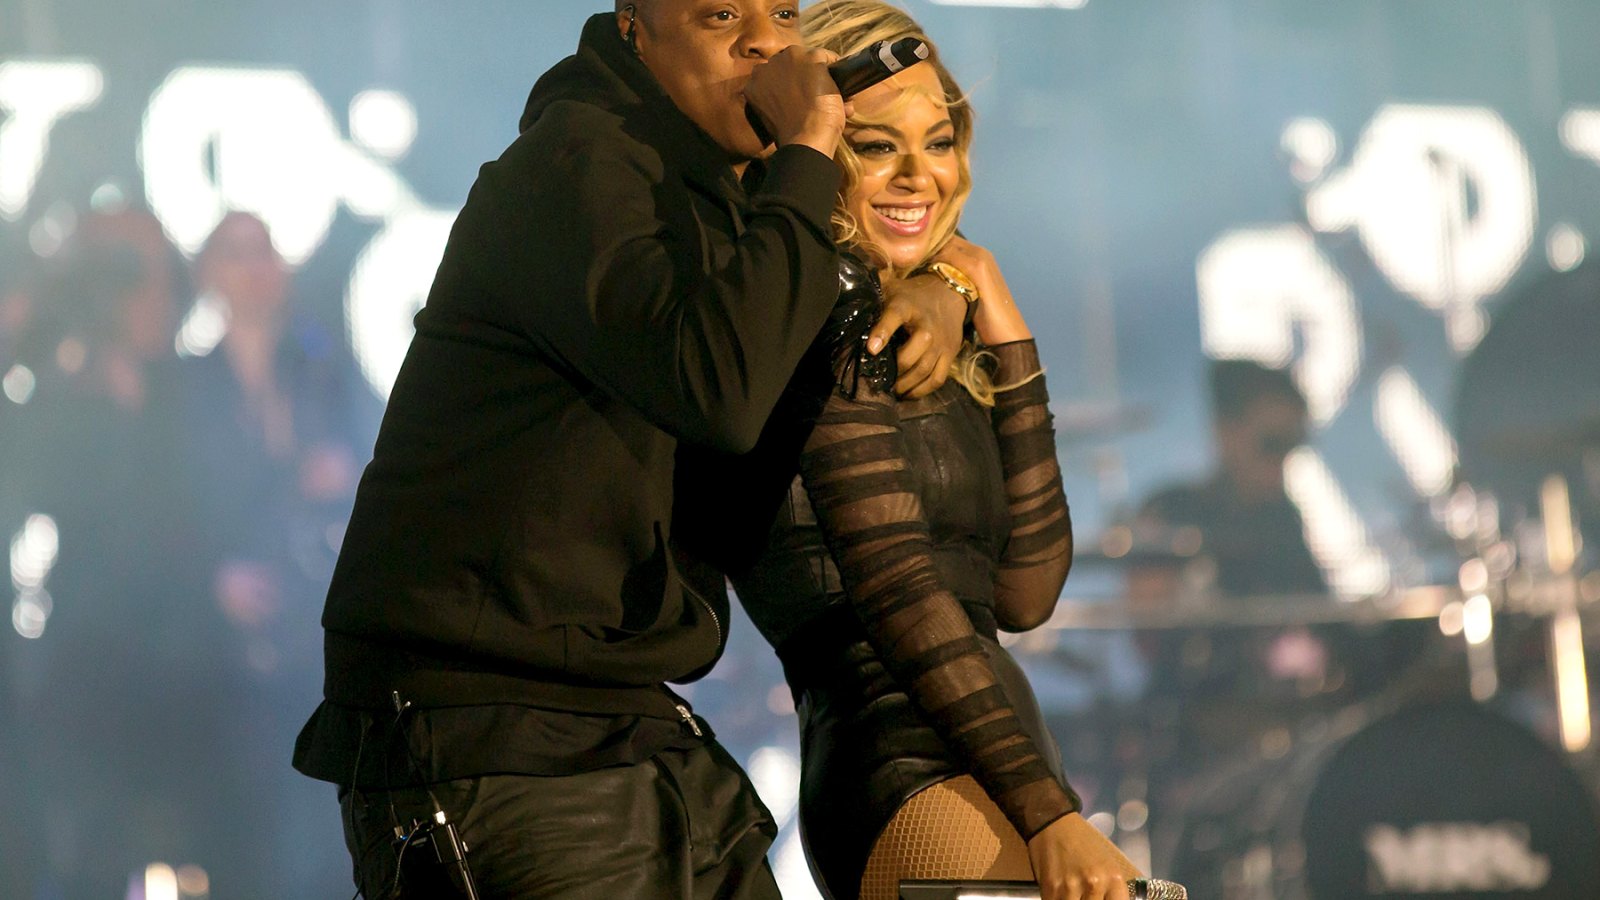 Jay-Z and Beyonce perform together on June 1, 2013